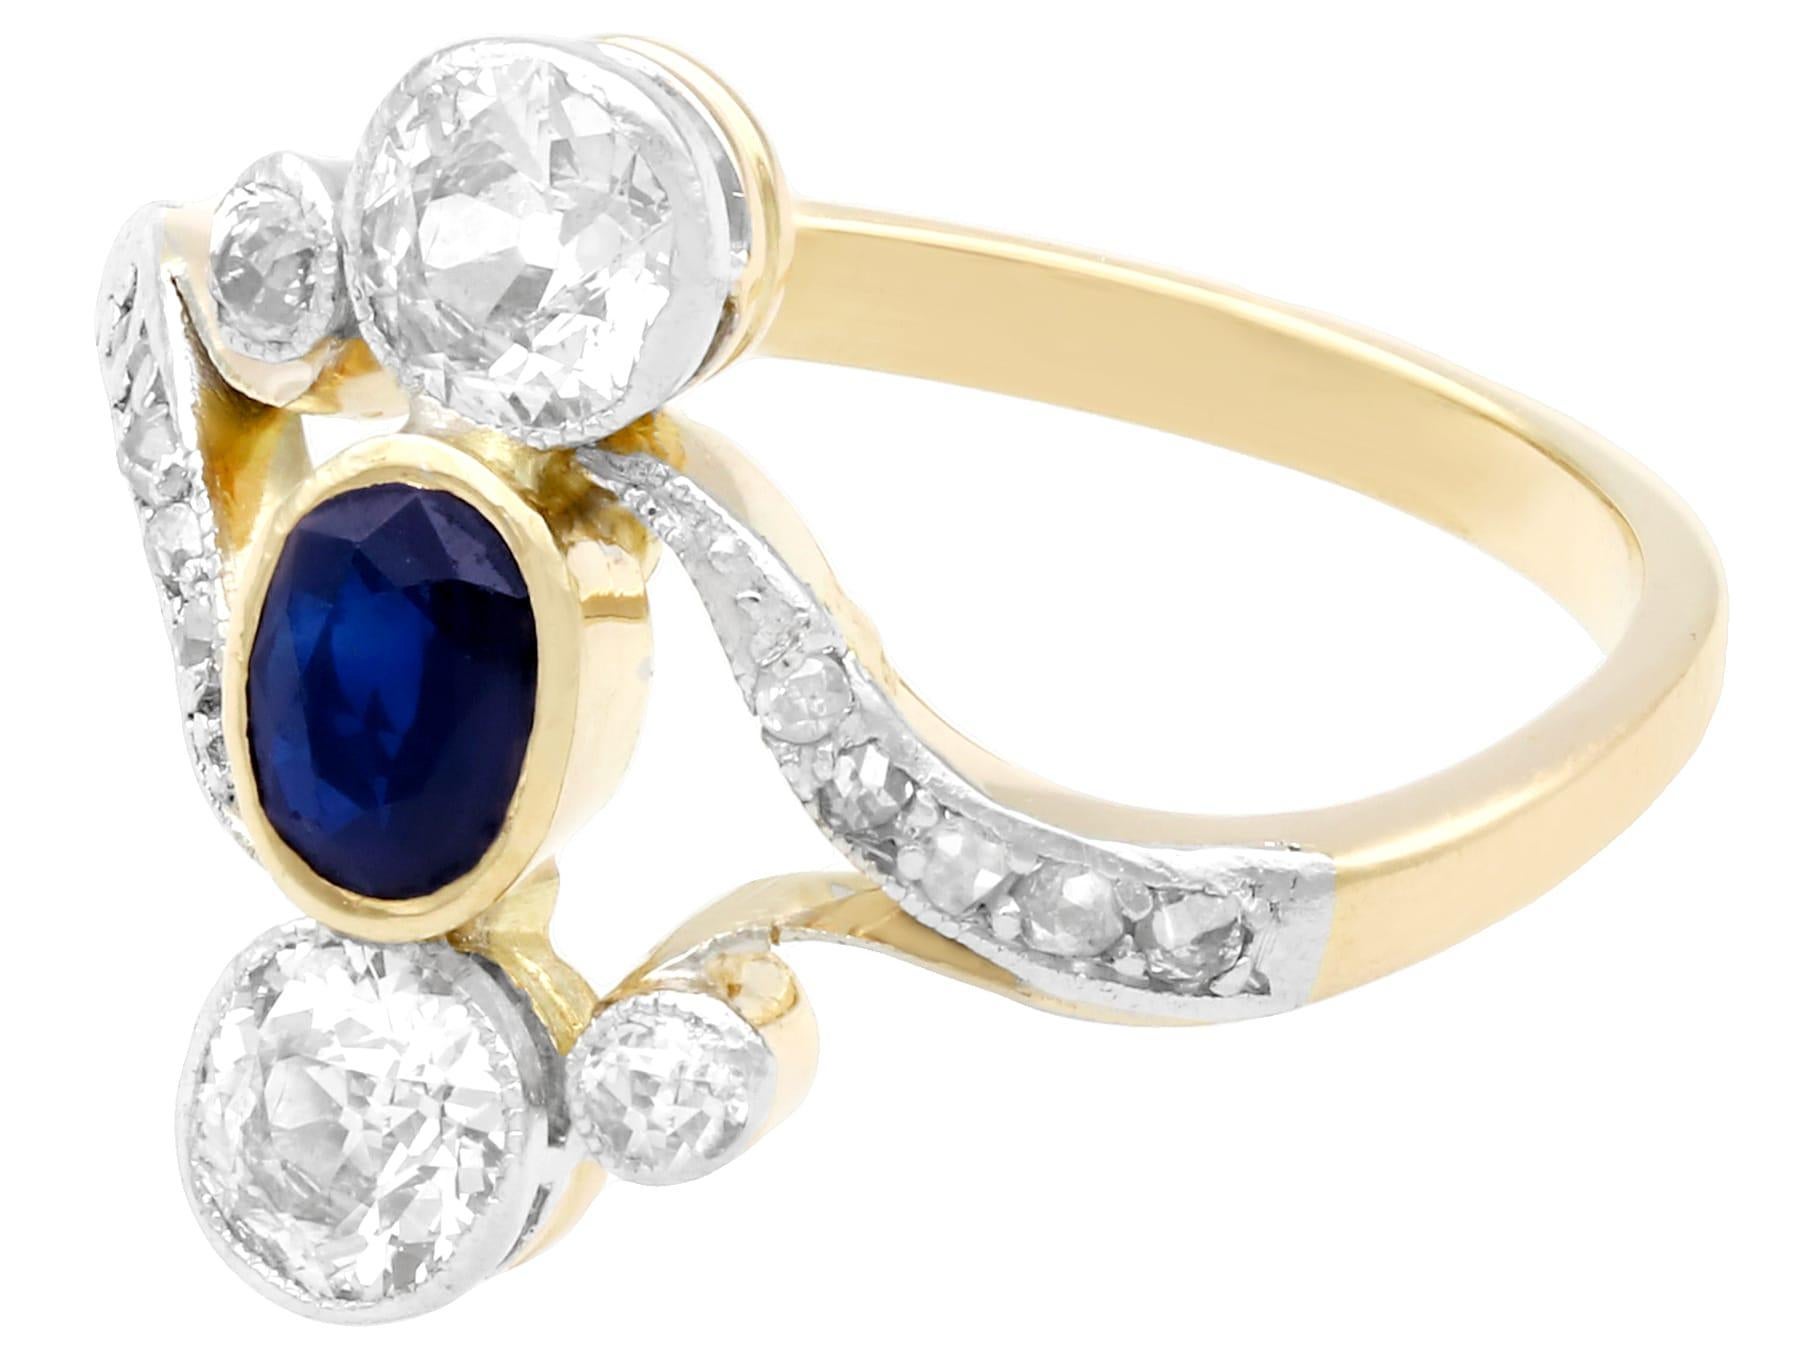 1930s Carat Sapphire and Diamond 14K Yellow Gold Twist Cocktail Ring In Good Condition For Sale In Jesmond, Newcastle Upon Tyne